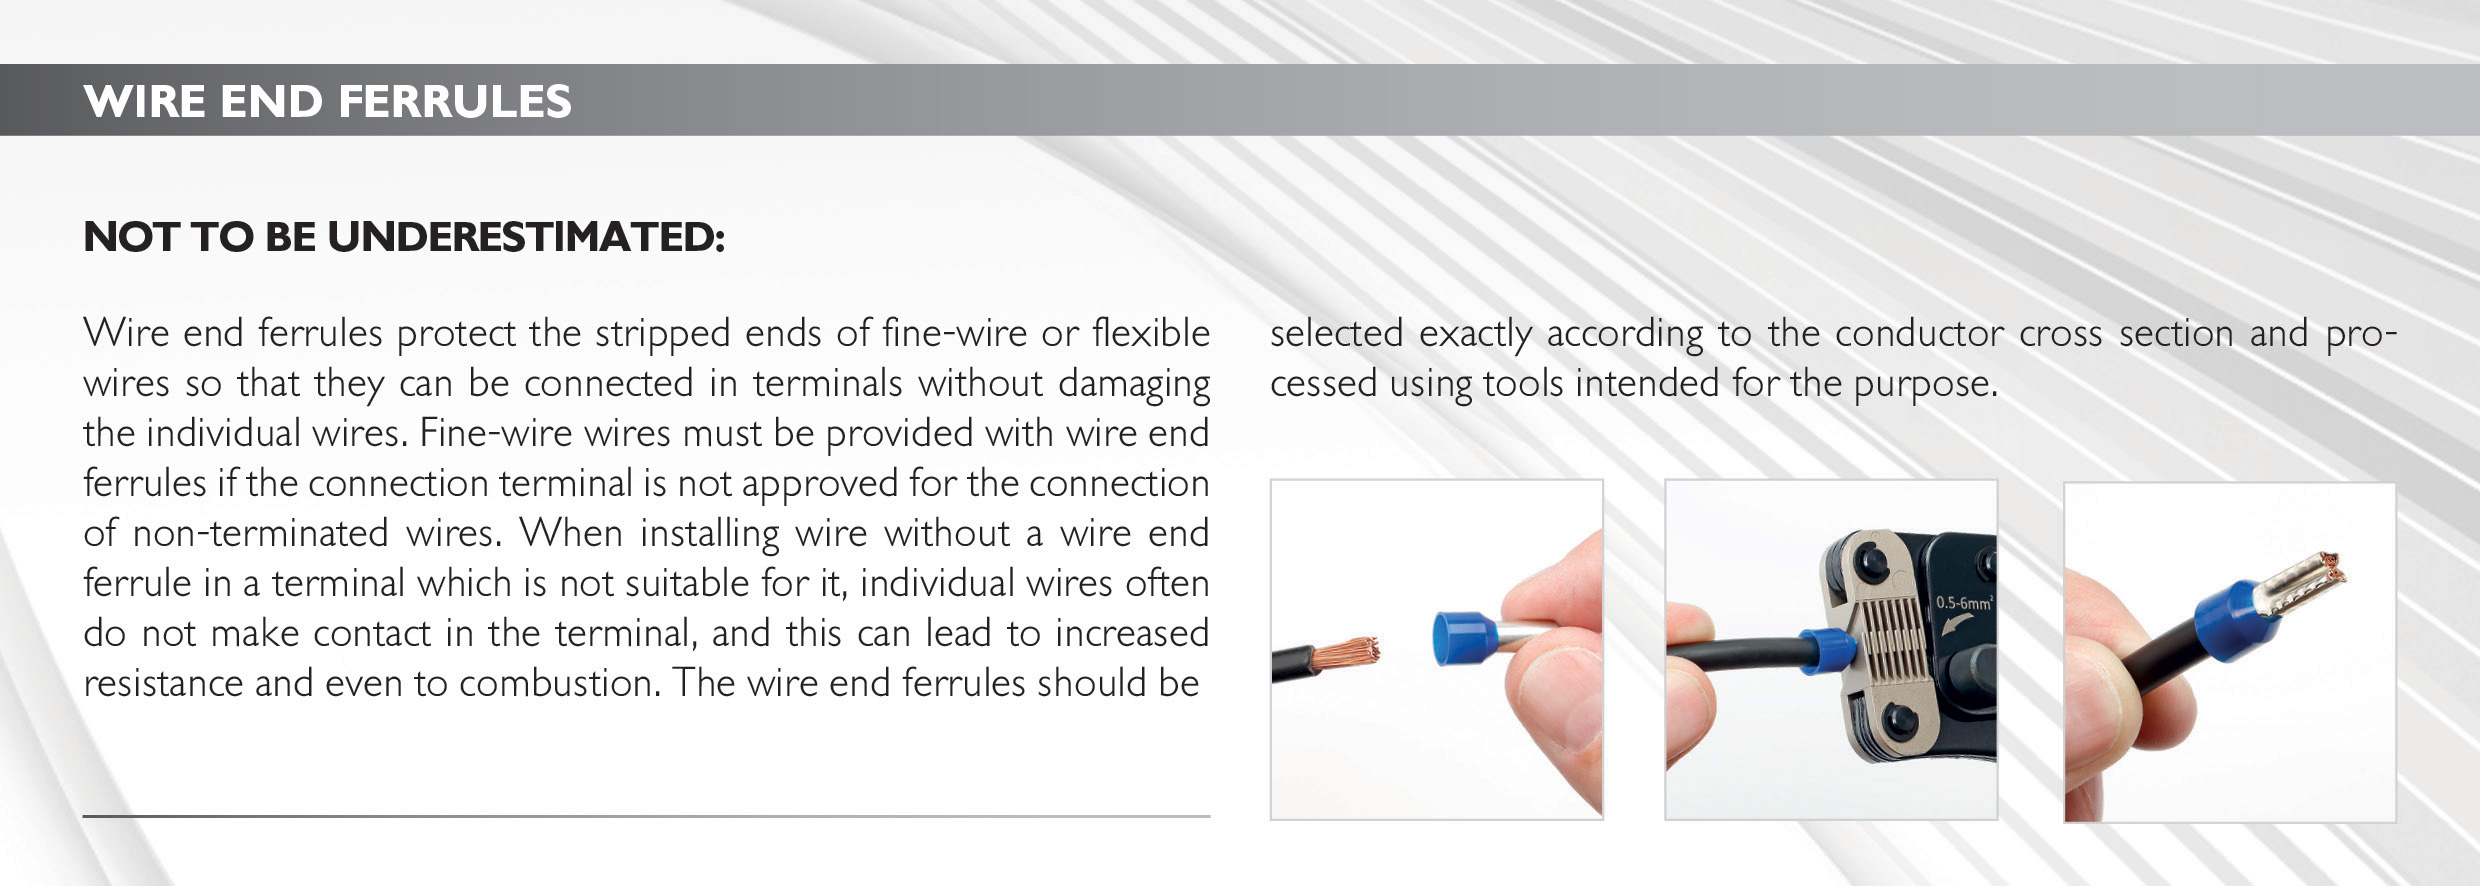 Wire end ferrules
Not to be underestimated: Wire end ferrules protect the stripped ends of fine-wire or flexible wires so that they can be connected in terminals without damaging the individual wires. Fine-wire wires must be provided with wire end ferrules if the connection terminal is not approved for the connection of non-terminated wires. When installing wire without a wire end ferrule in a terminal which is not suitable for it, individual wires often do not make contact in the terminal, and this can lead to increased resistance and even to combustion. The wire end ferrules should be selected exactly according to the conductor cross section and processed using tools intended for the purpose. 